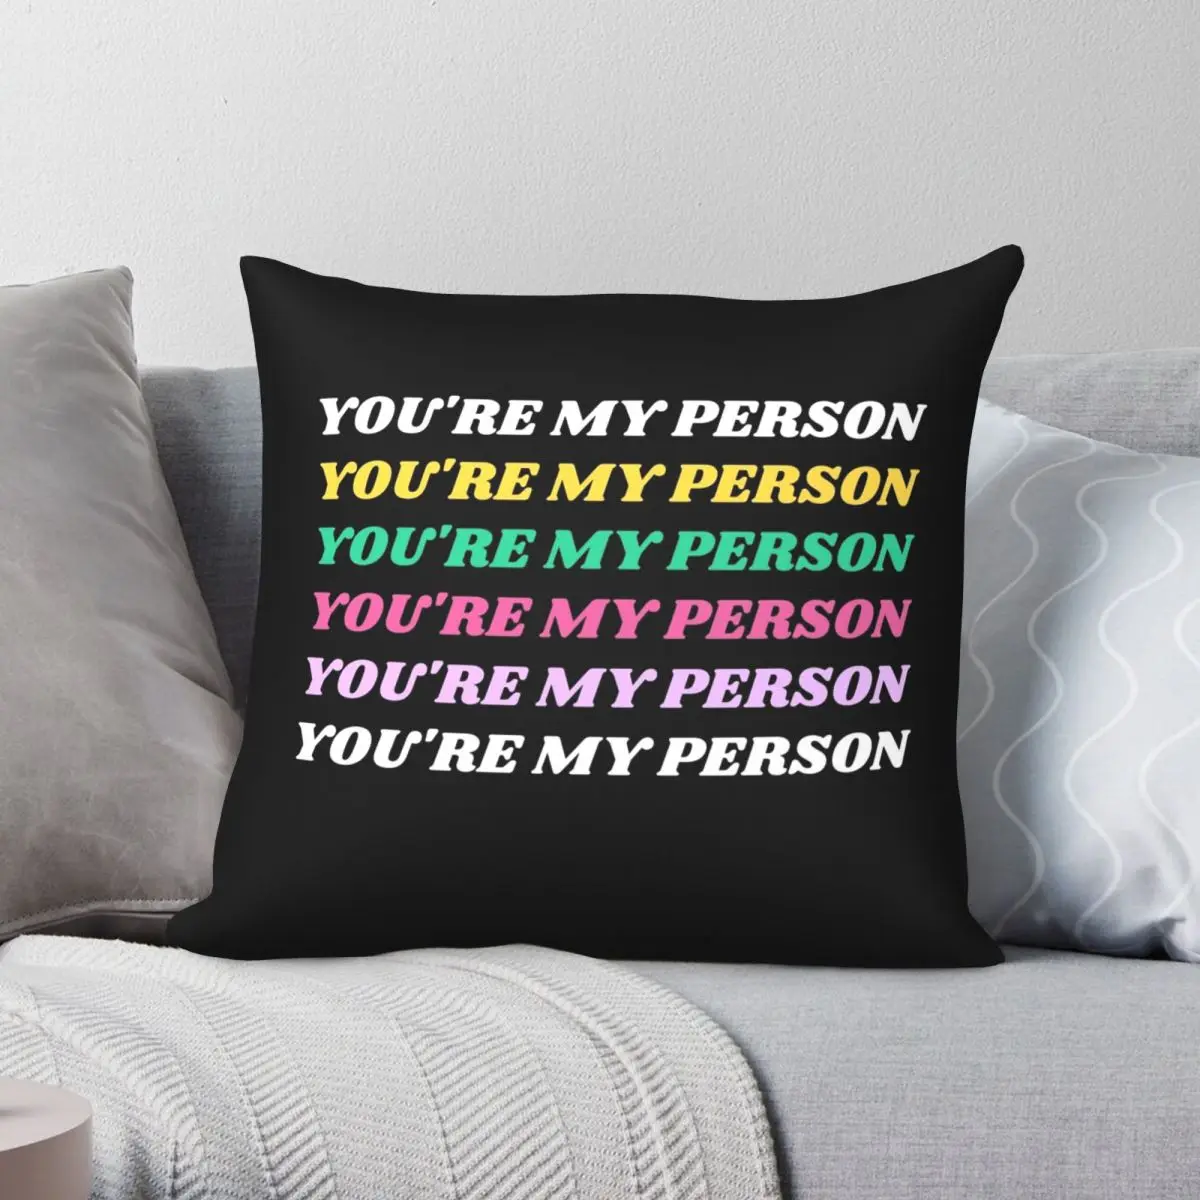 

Youre My Person Greys Quote Square Pillowcase Polyester Linen Velvet Creative Zip Decor Sofa Cushion Cover